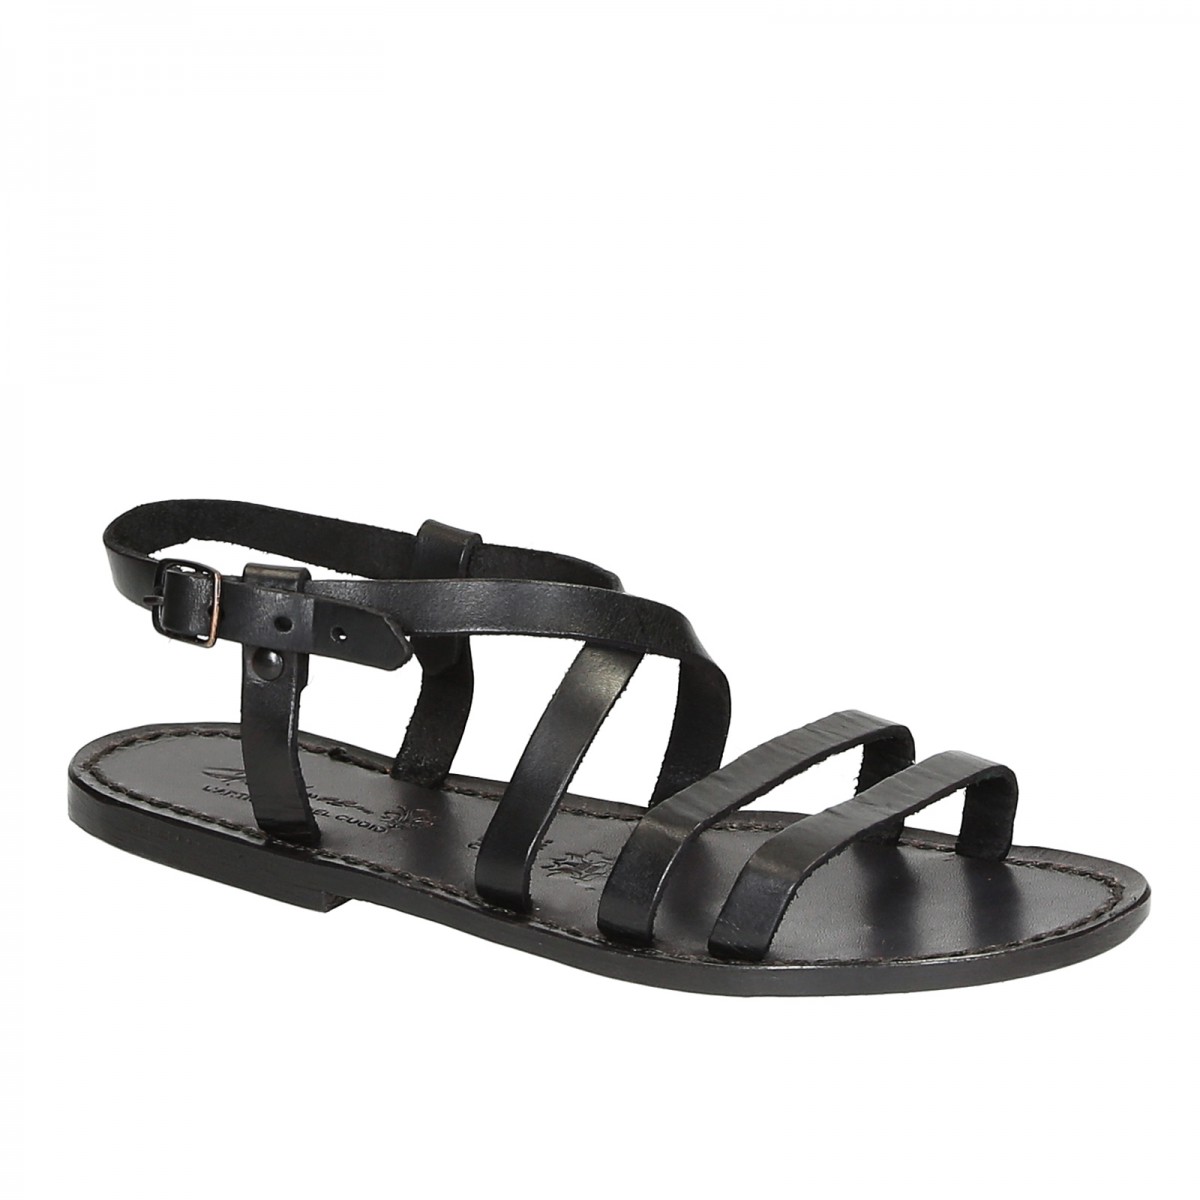 Women's black leather sandals handmade in Italy | The leather craftsmen